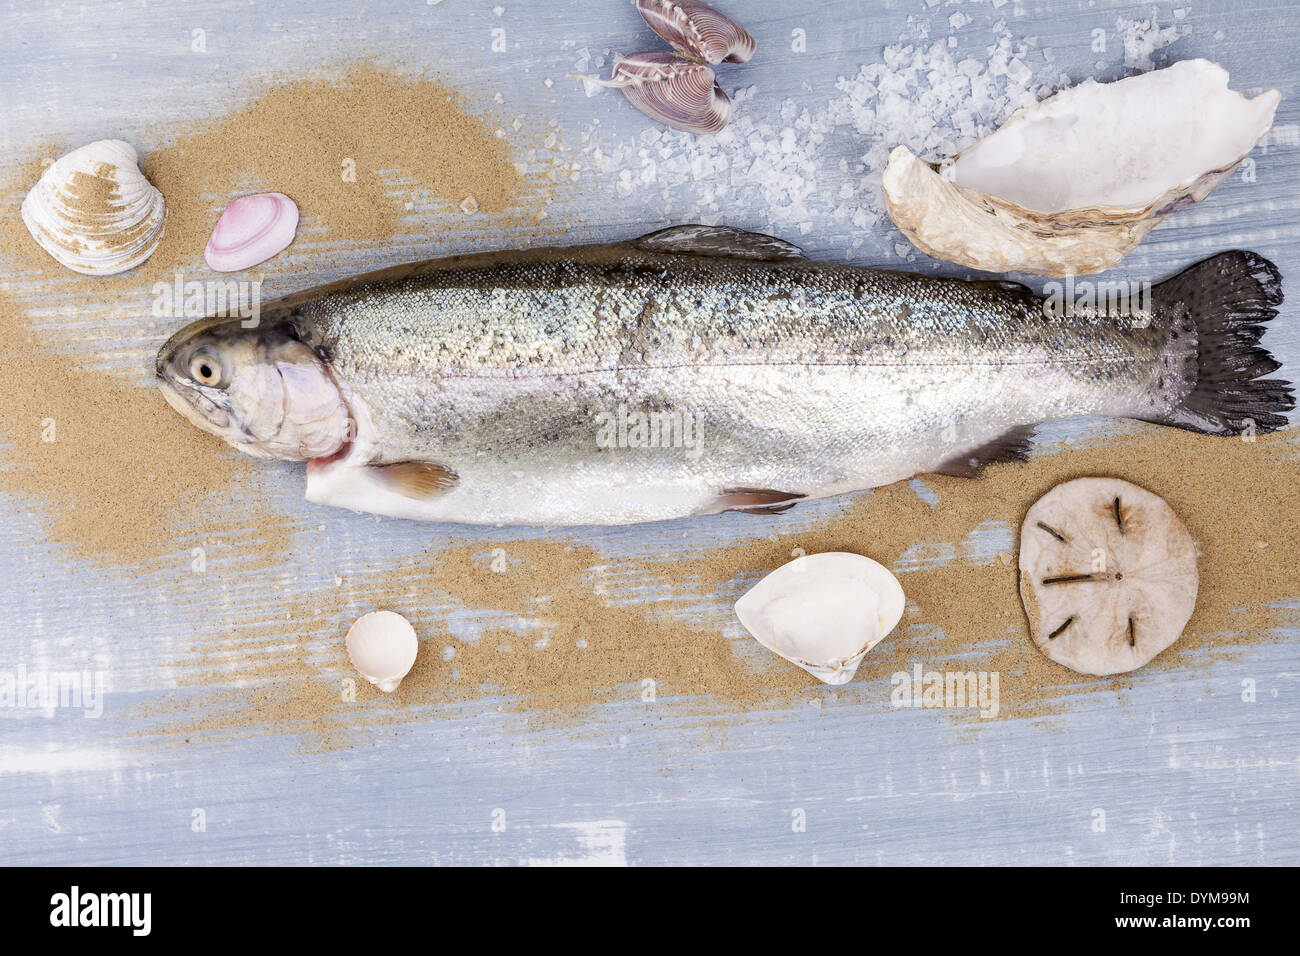 Culinary seafood eating. Fresh trout on blue wooden background with sand, sea salt and seashell. Stock Photo